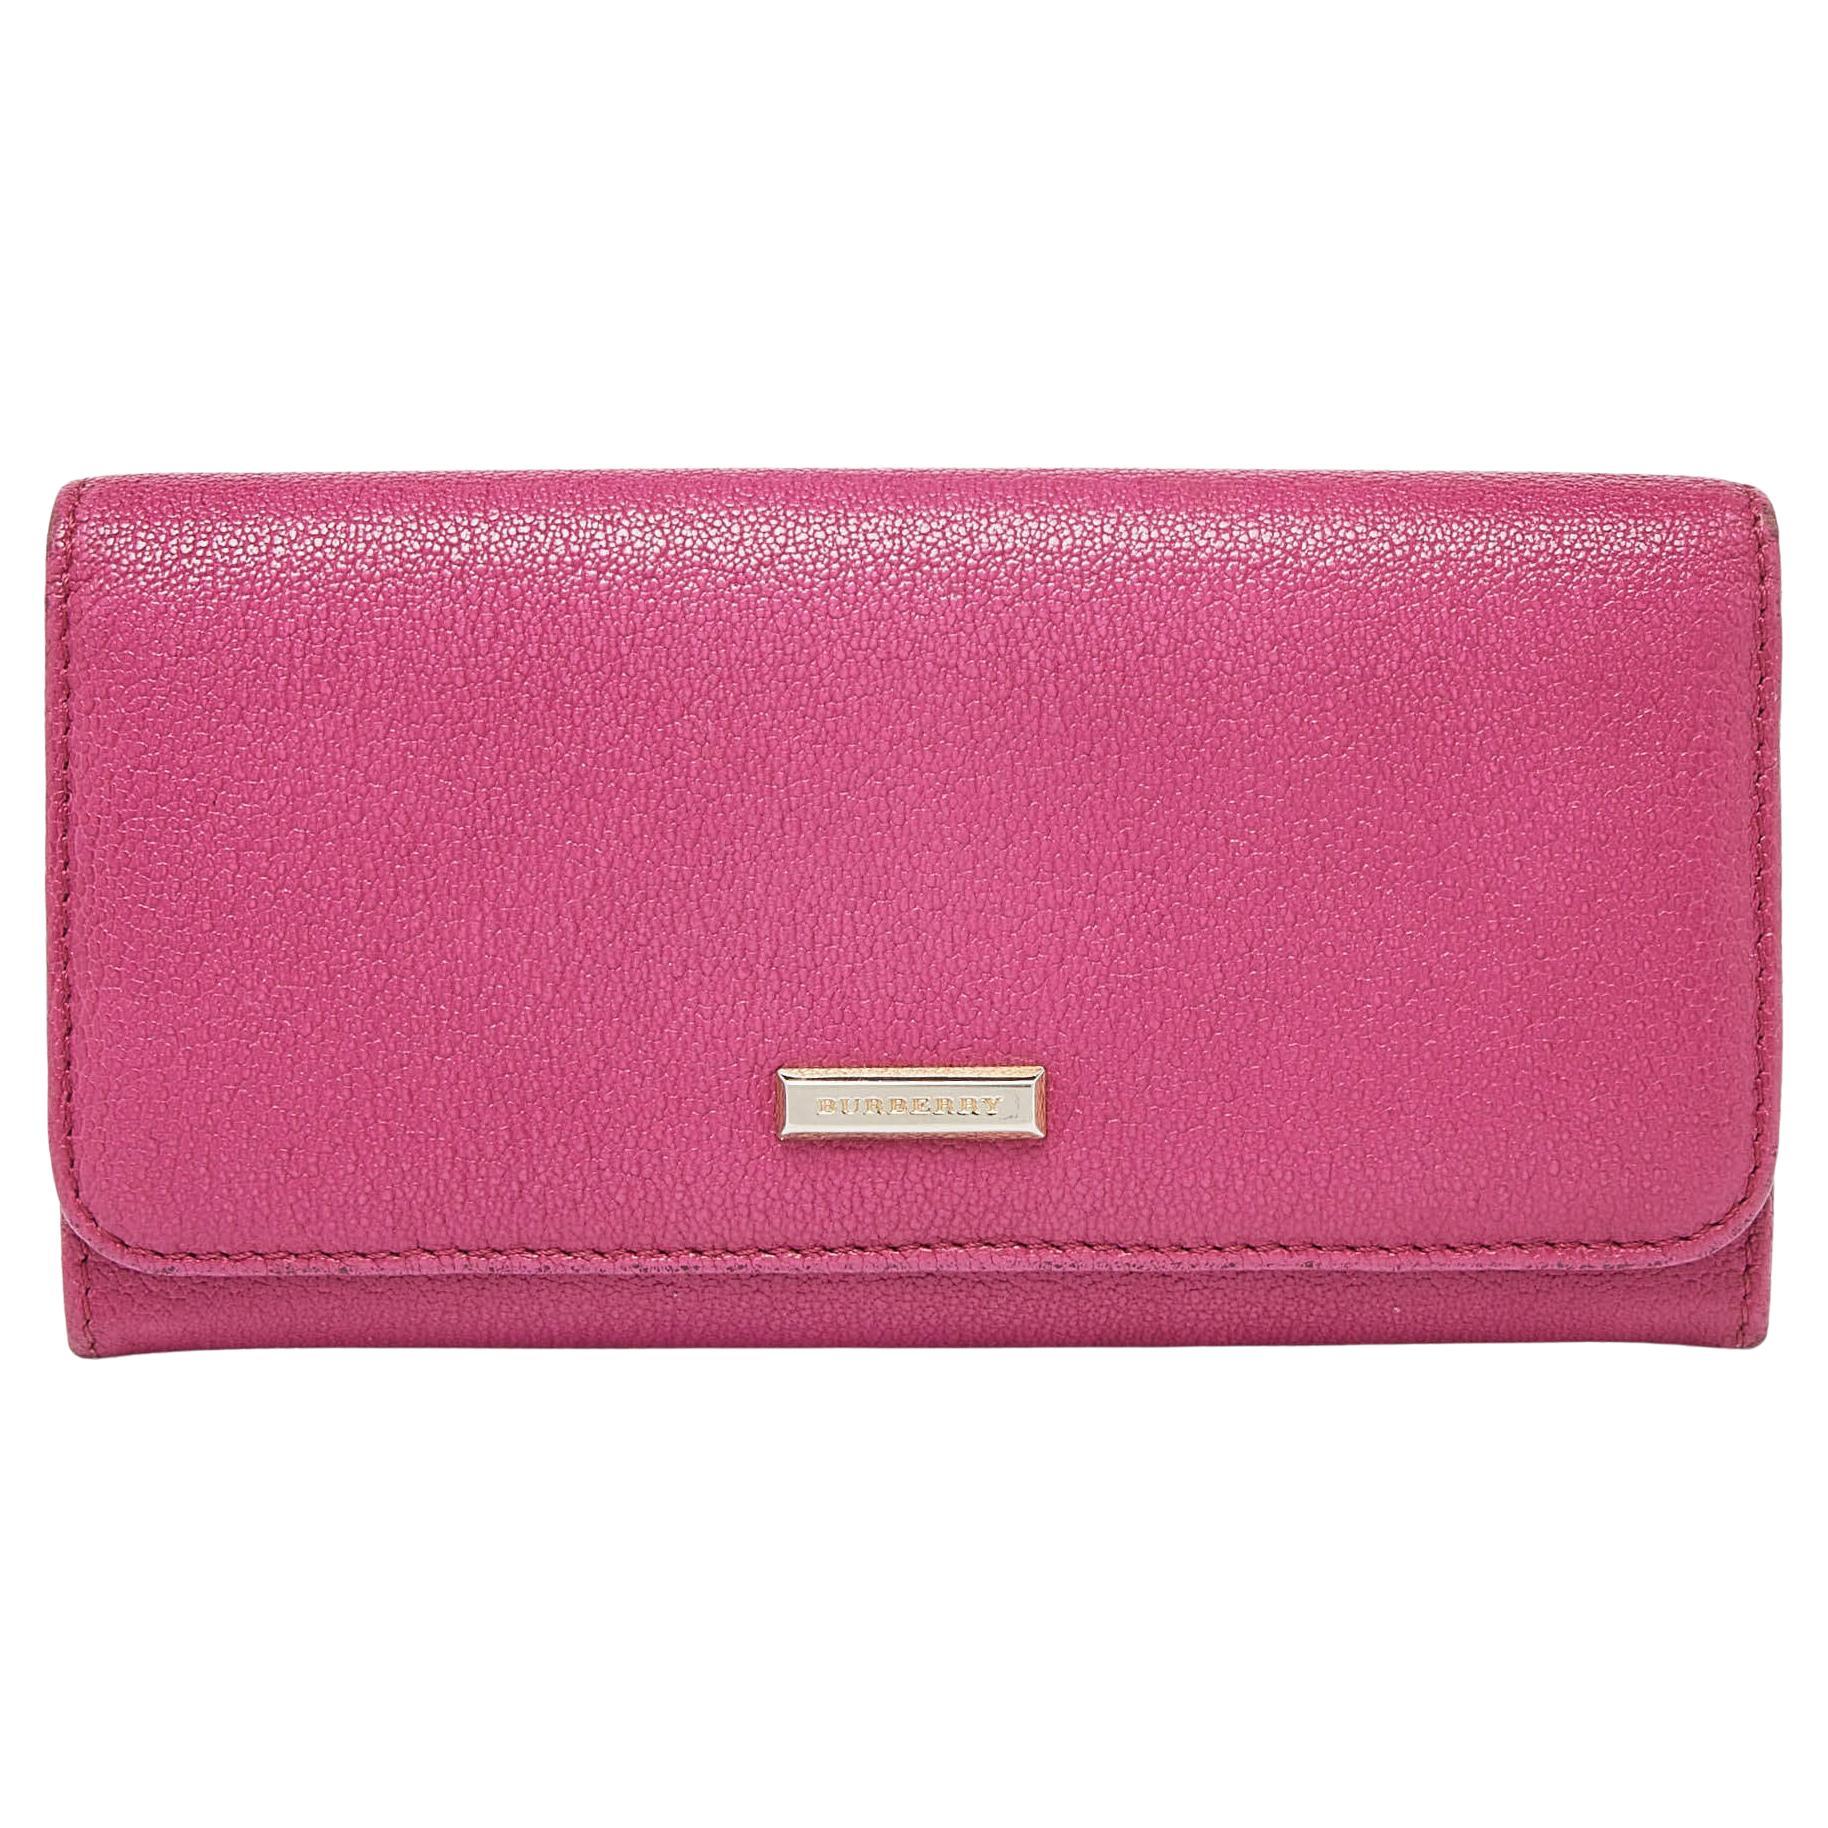 Burberry Pink Leather Flap Continental Wallet For Sale